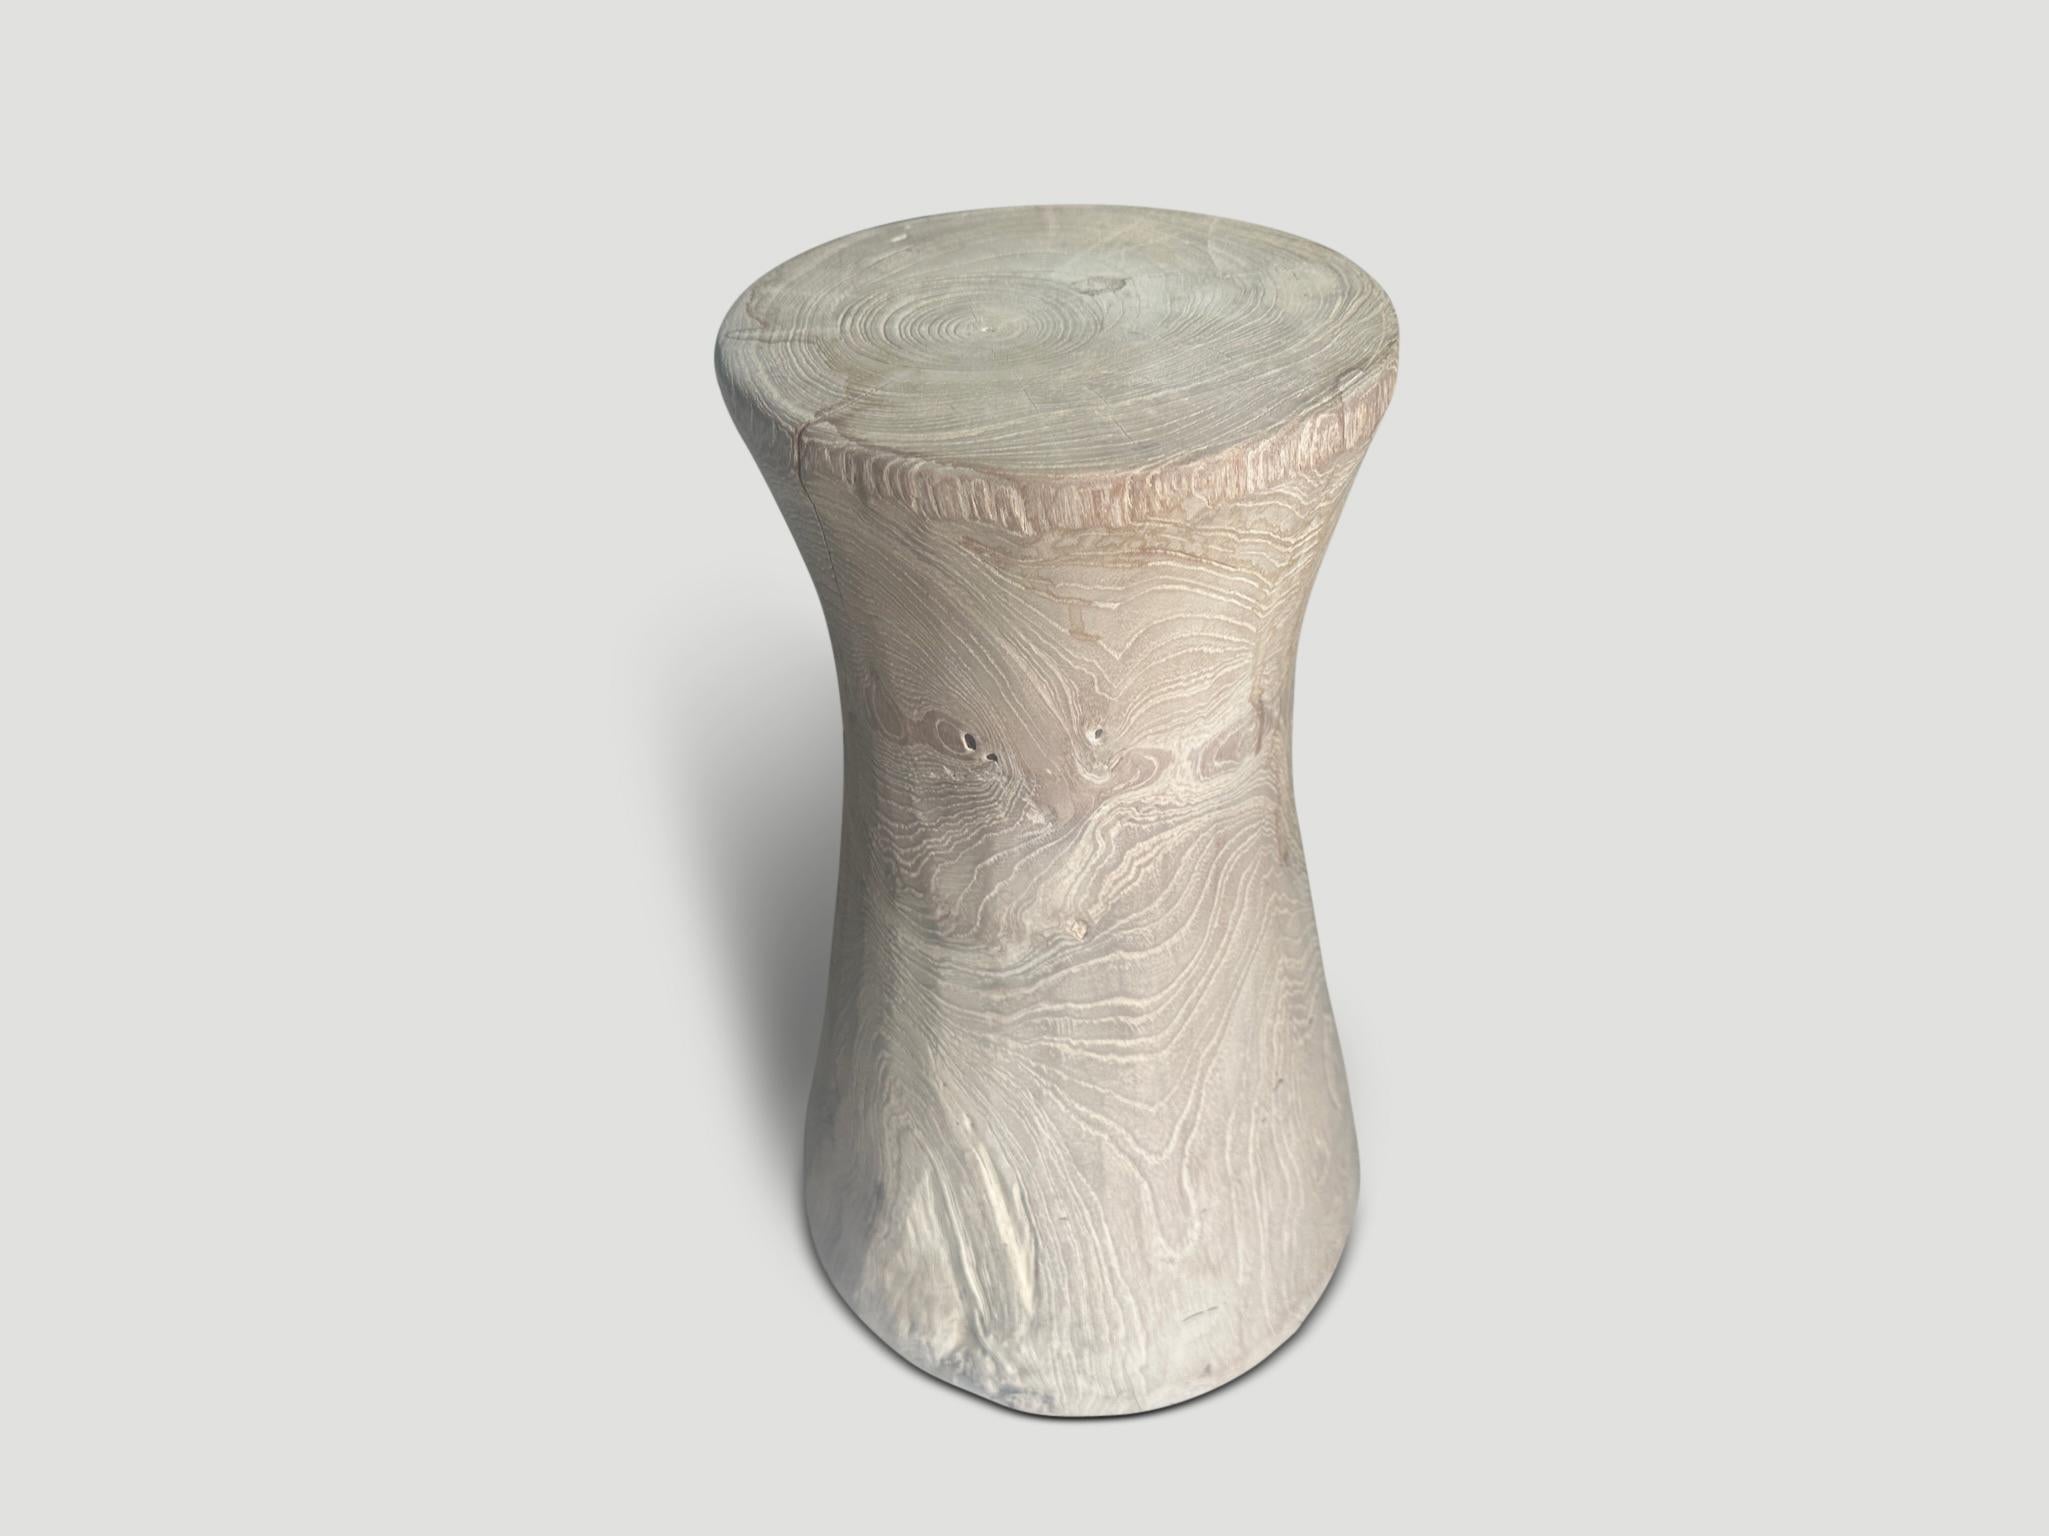 Sculptural hourglass side table or stool. Bleached and then finished with a light white wash revealing the beautiful grain on this century old teak wood. It’s all in the details. Pair available. The price and images reflect the one shown. Full